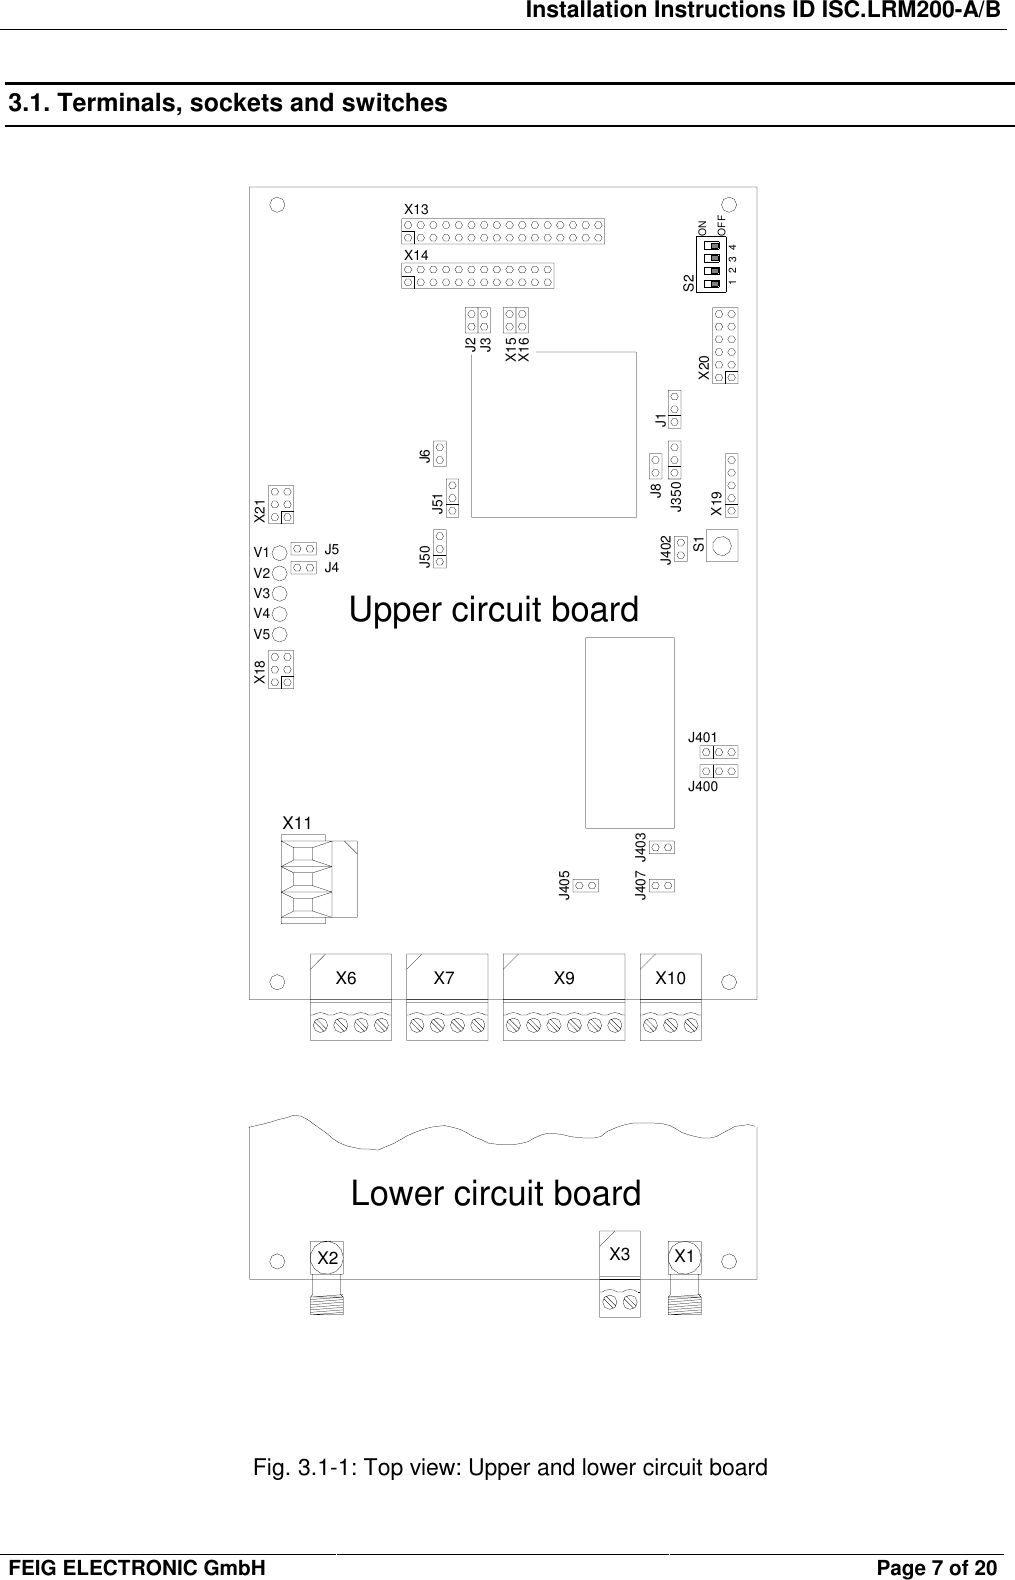 Installation Instructions ID ISC.LRM200-A/BFEIG ELECTRONIC GmbH Page 7 of 203.1. Terminals, sockets and switchesFig. 3.1-1: Top view: Upper and lower circuit boardX7 X9 X10X6J405J407 J403J400J8 J1X19J350X20J402J401S1X16X15J3J2X13X14J51 J6J50X21J5J4X18X11S2ONOFF1  2  3  4X3 X1X2Lower circuit boardUpper circuit boardV1V2V3V4V5